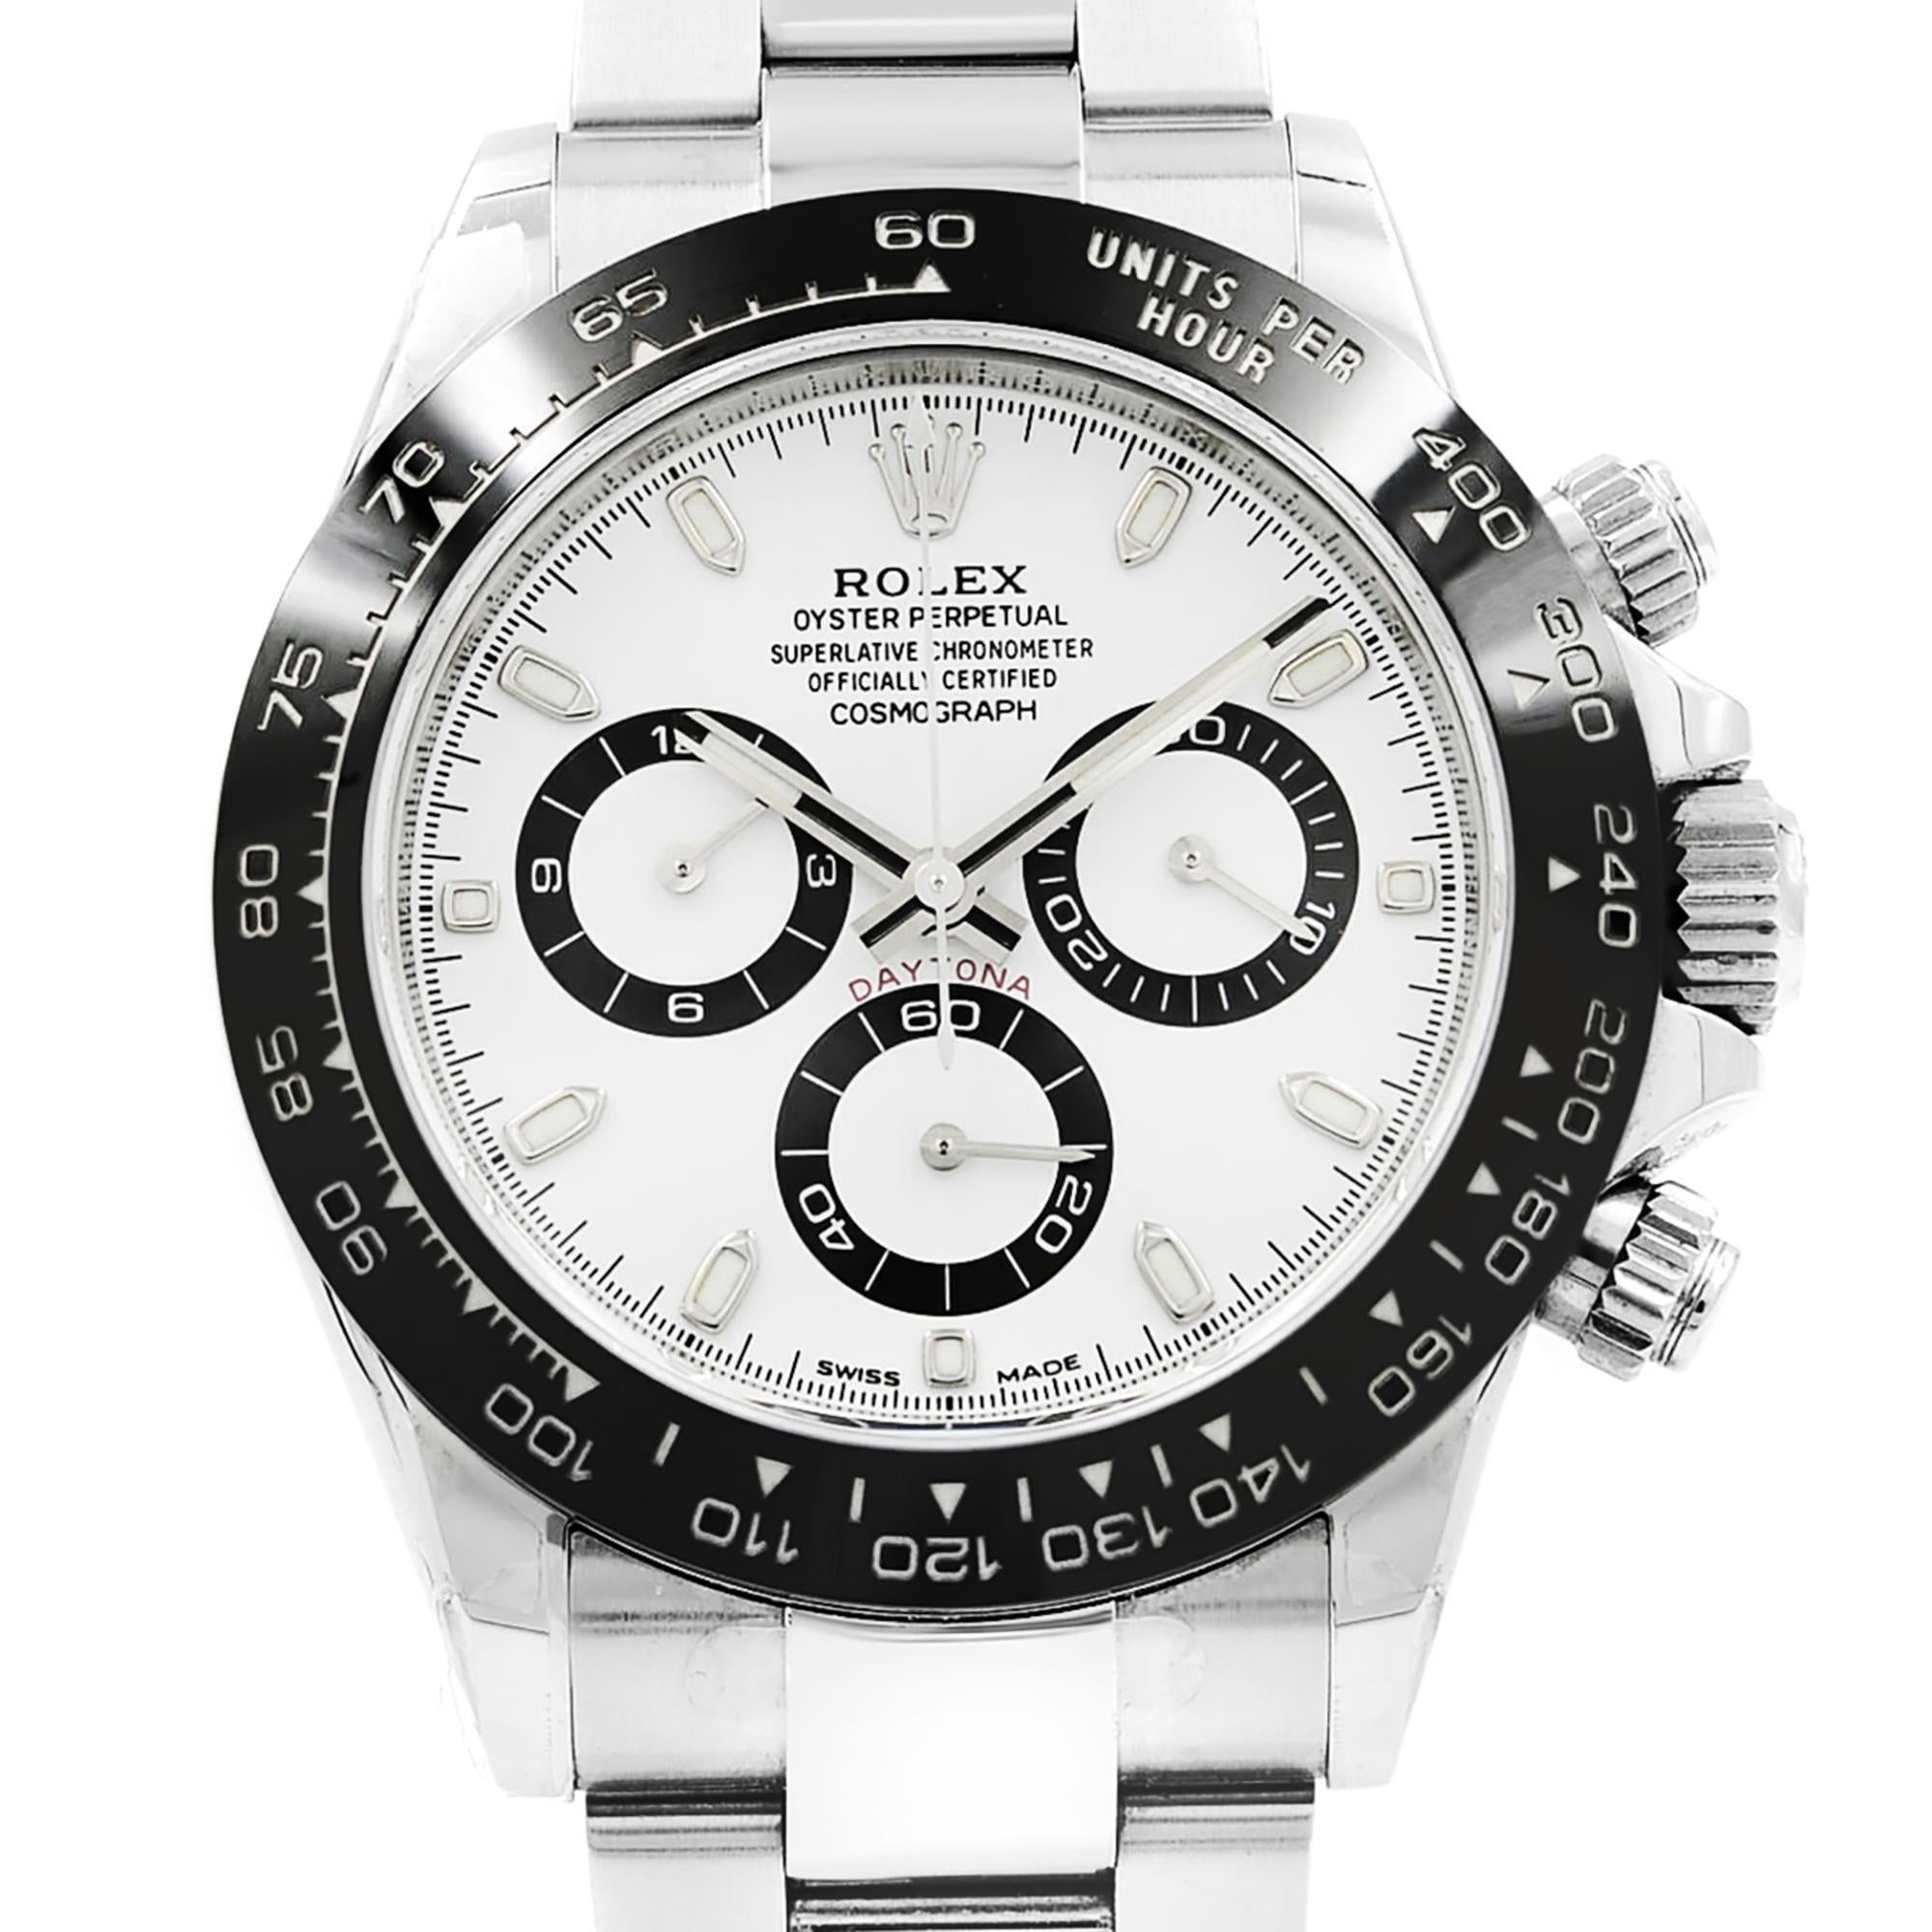 This brand new Rolex Cosmograph Daytona  116500LN  is a beautiful men's timepiece that is powered by mechanical (automatic) movement which is cased in a stainless steel case. It has a round shape face, chronograph, small seconds subdial, tachymeter